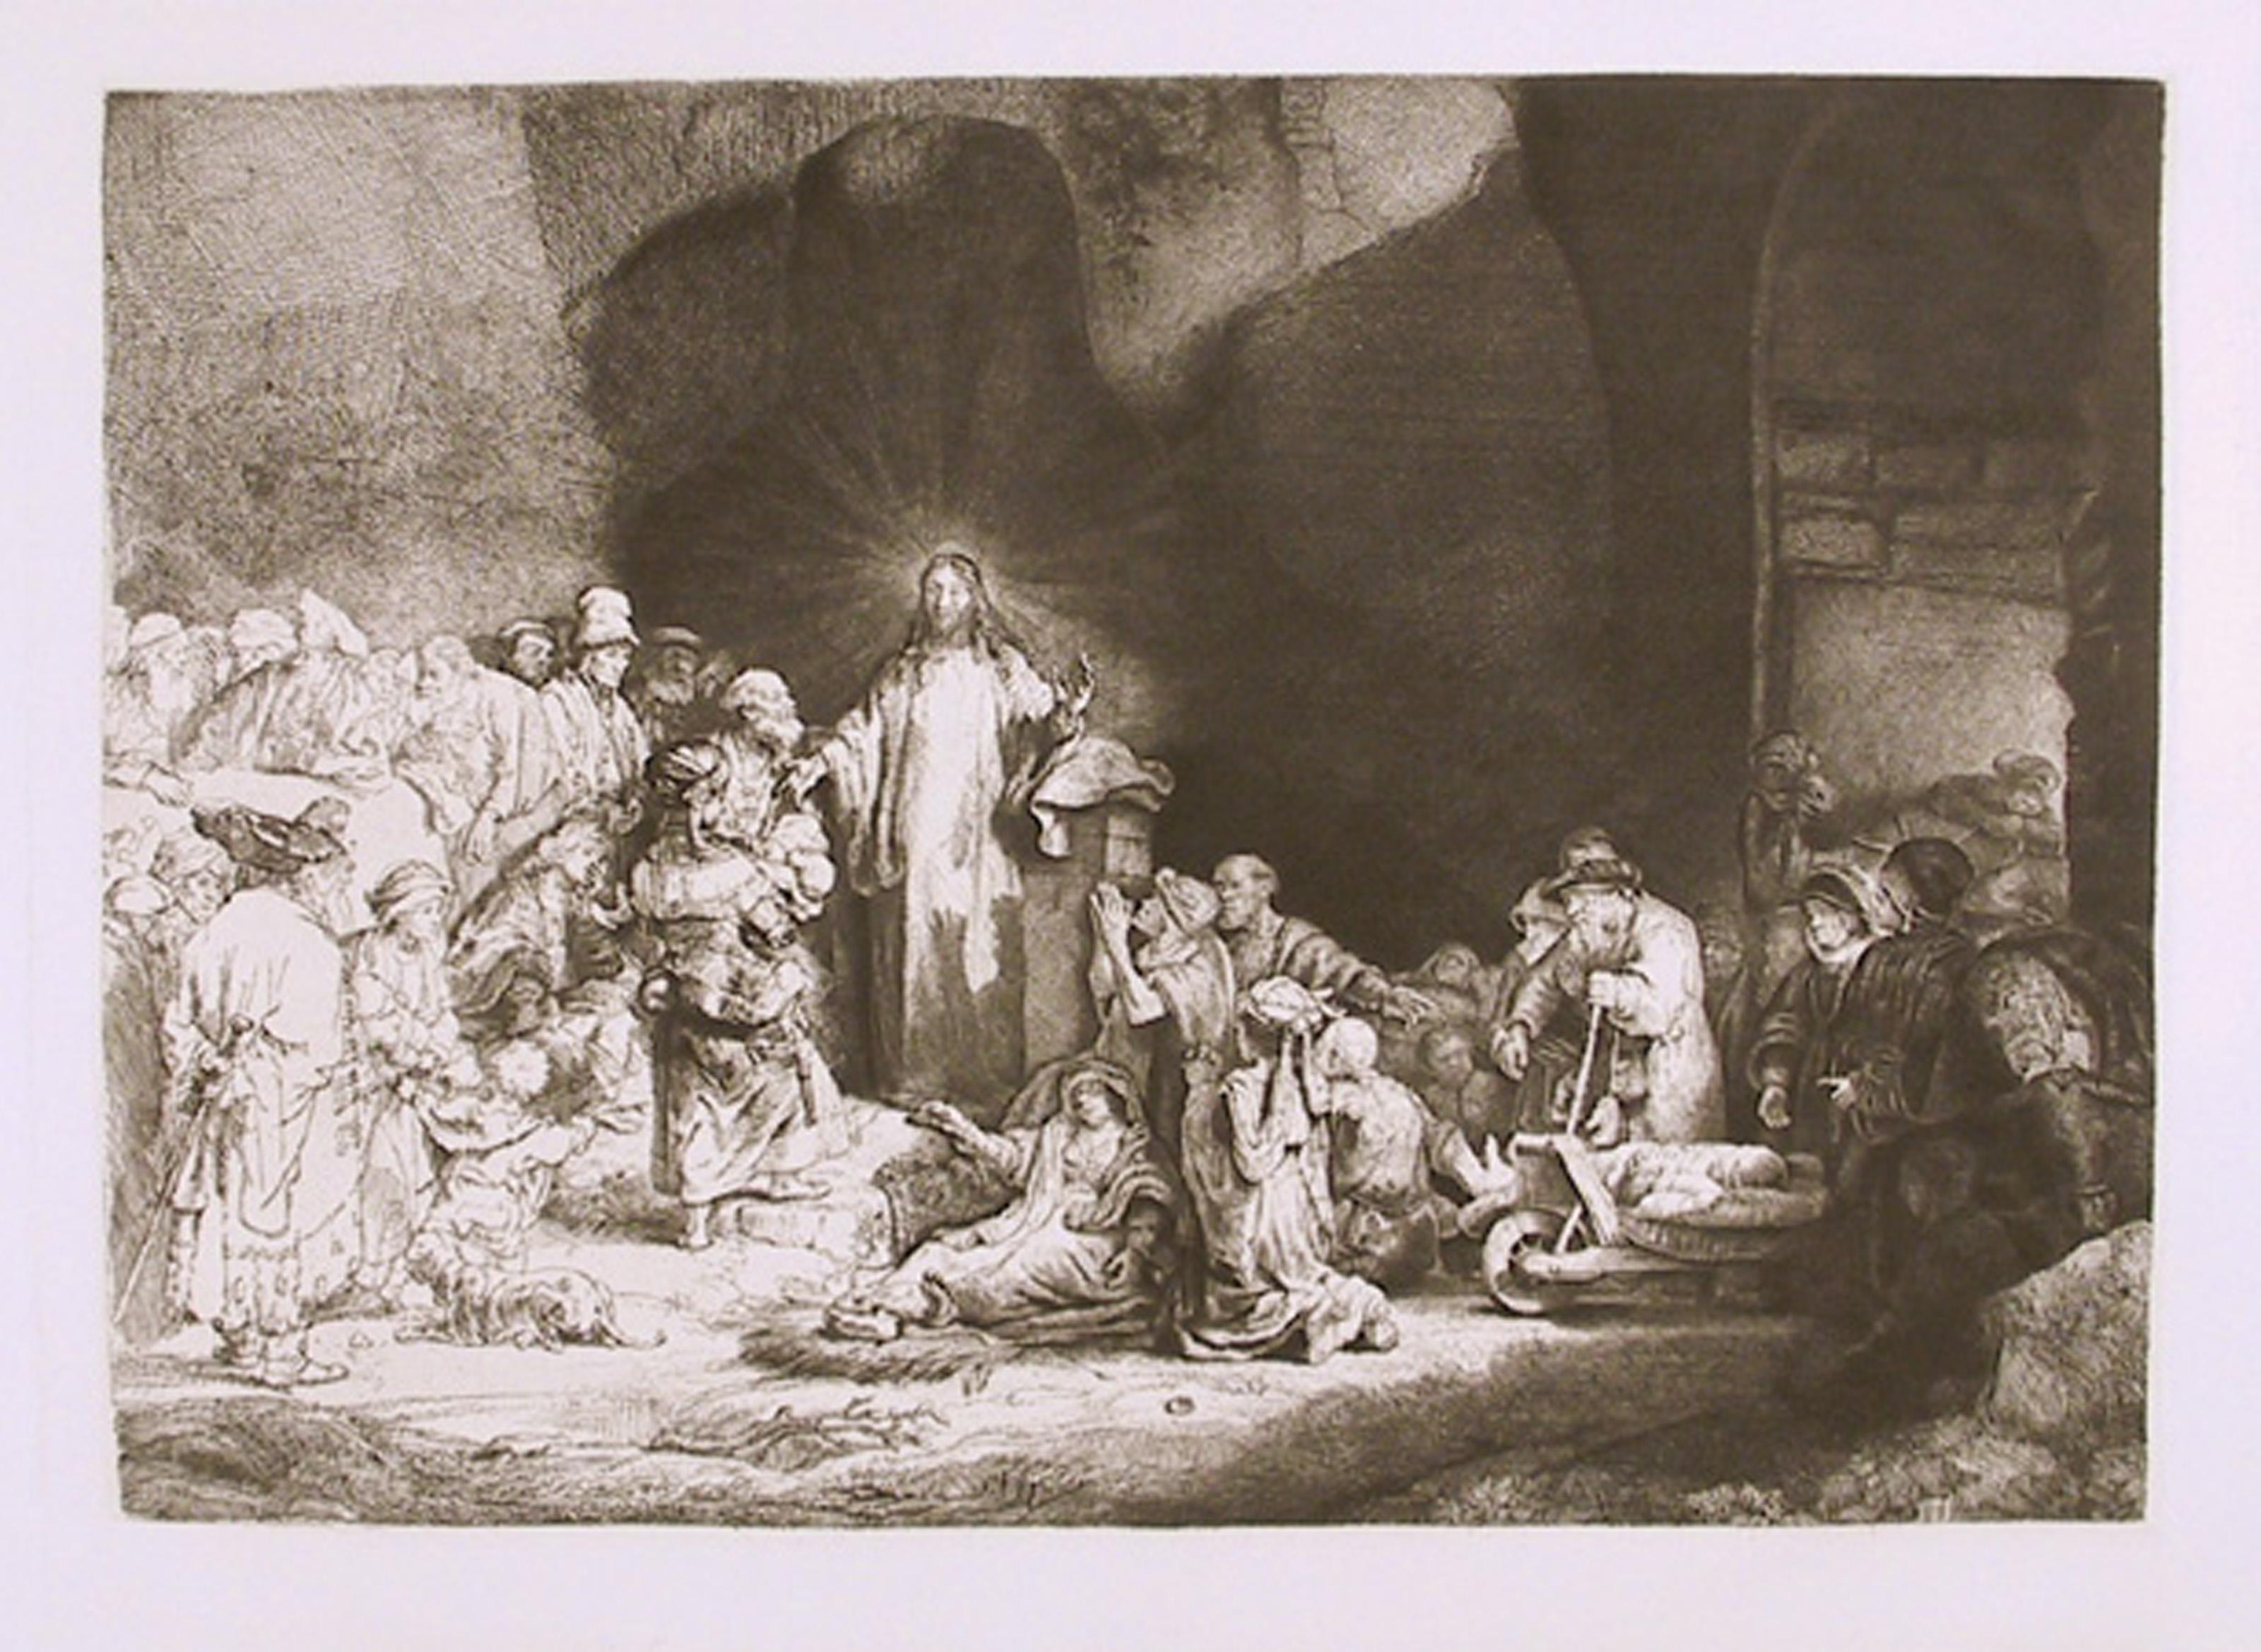  Rembrandt van Rijn, After by Amand Durand, Dutch (1606 - 1669) - The Hundred Guilder Print, Year: Of original btw 1643-1649, Medium: Etching, Image Size: 11 x 15.5 inches, Size: 20  x 26 in. (50.8  x 66.04 cm), Printer: Amand Durand, Description: